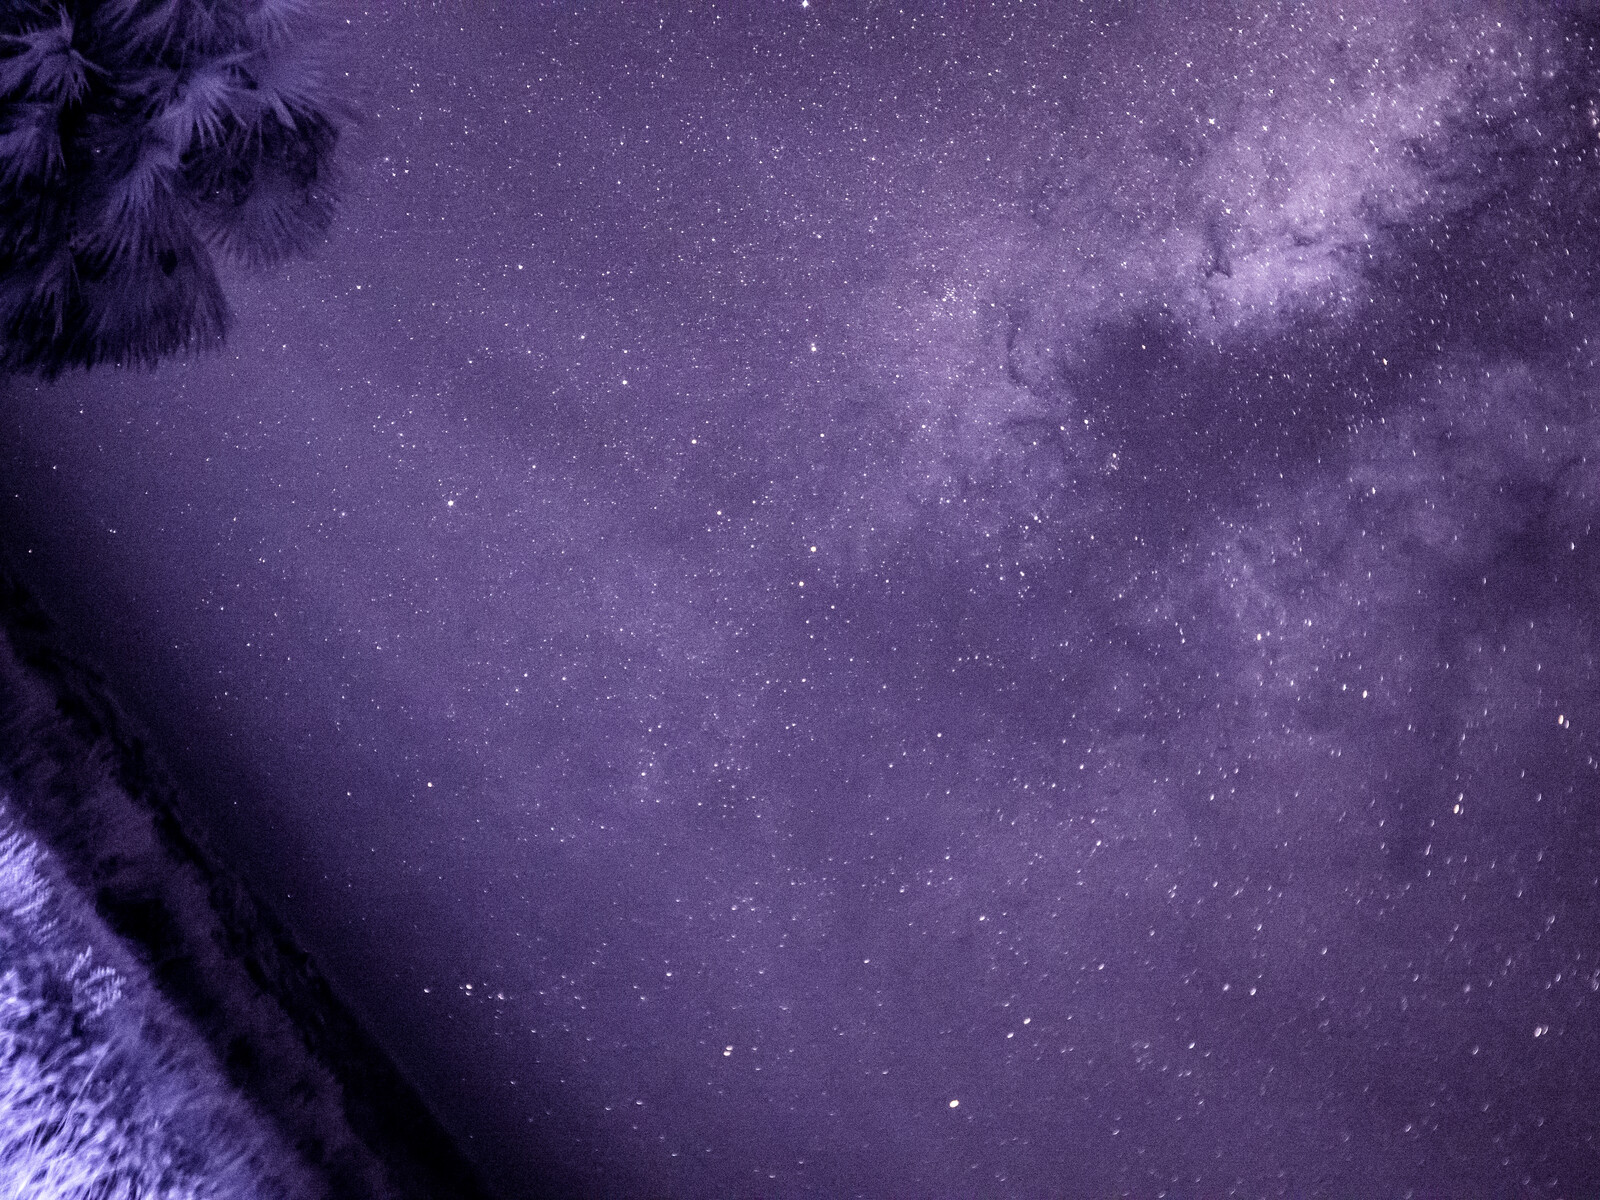 IR - Infrared Milky-Way to Gulf waters